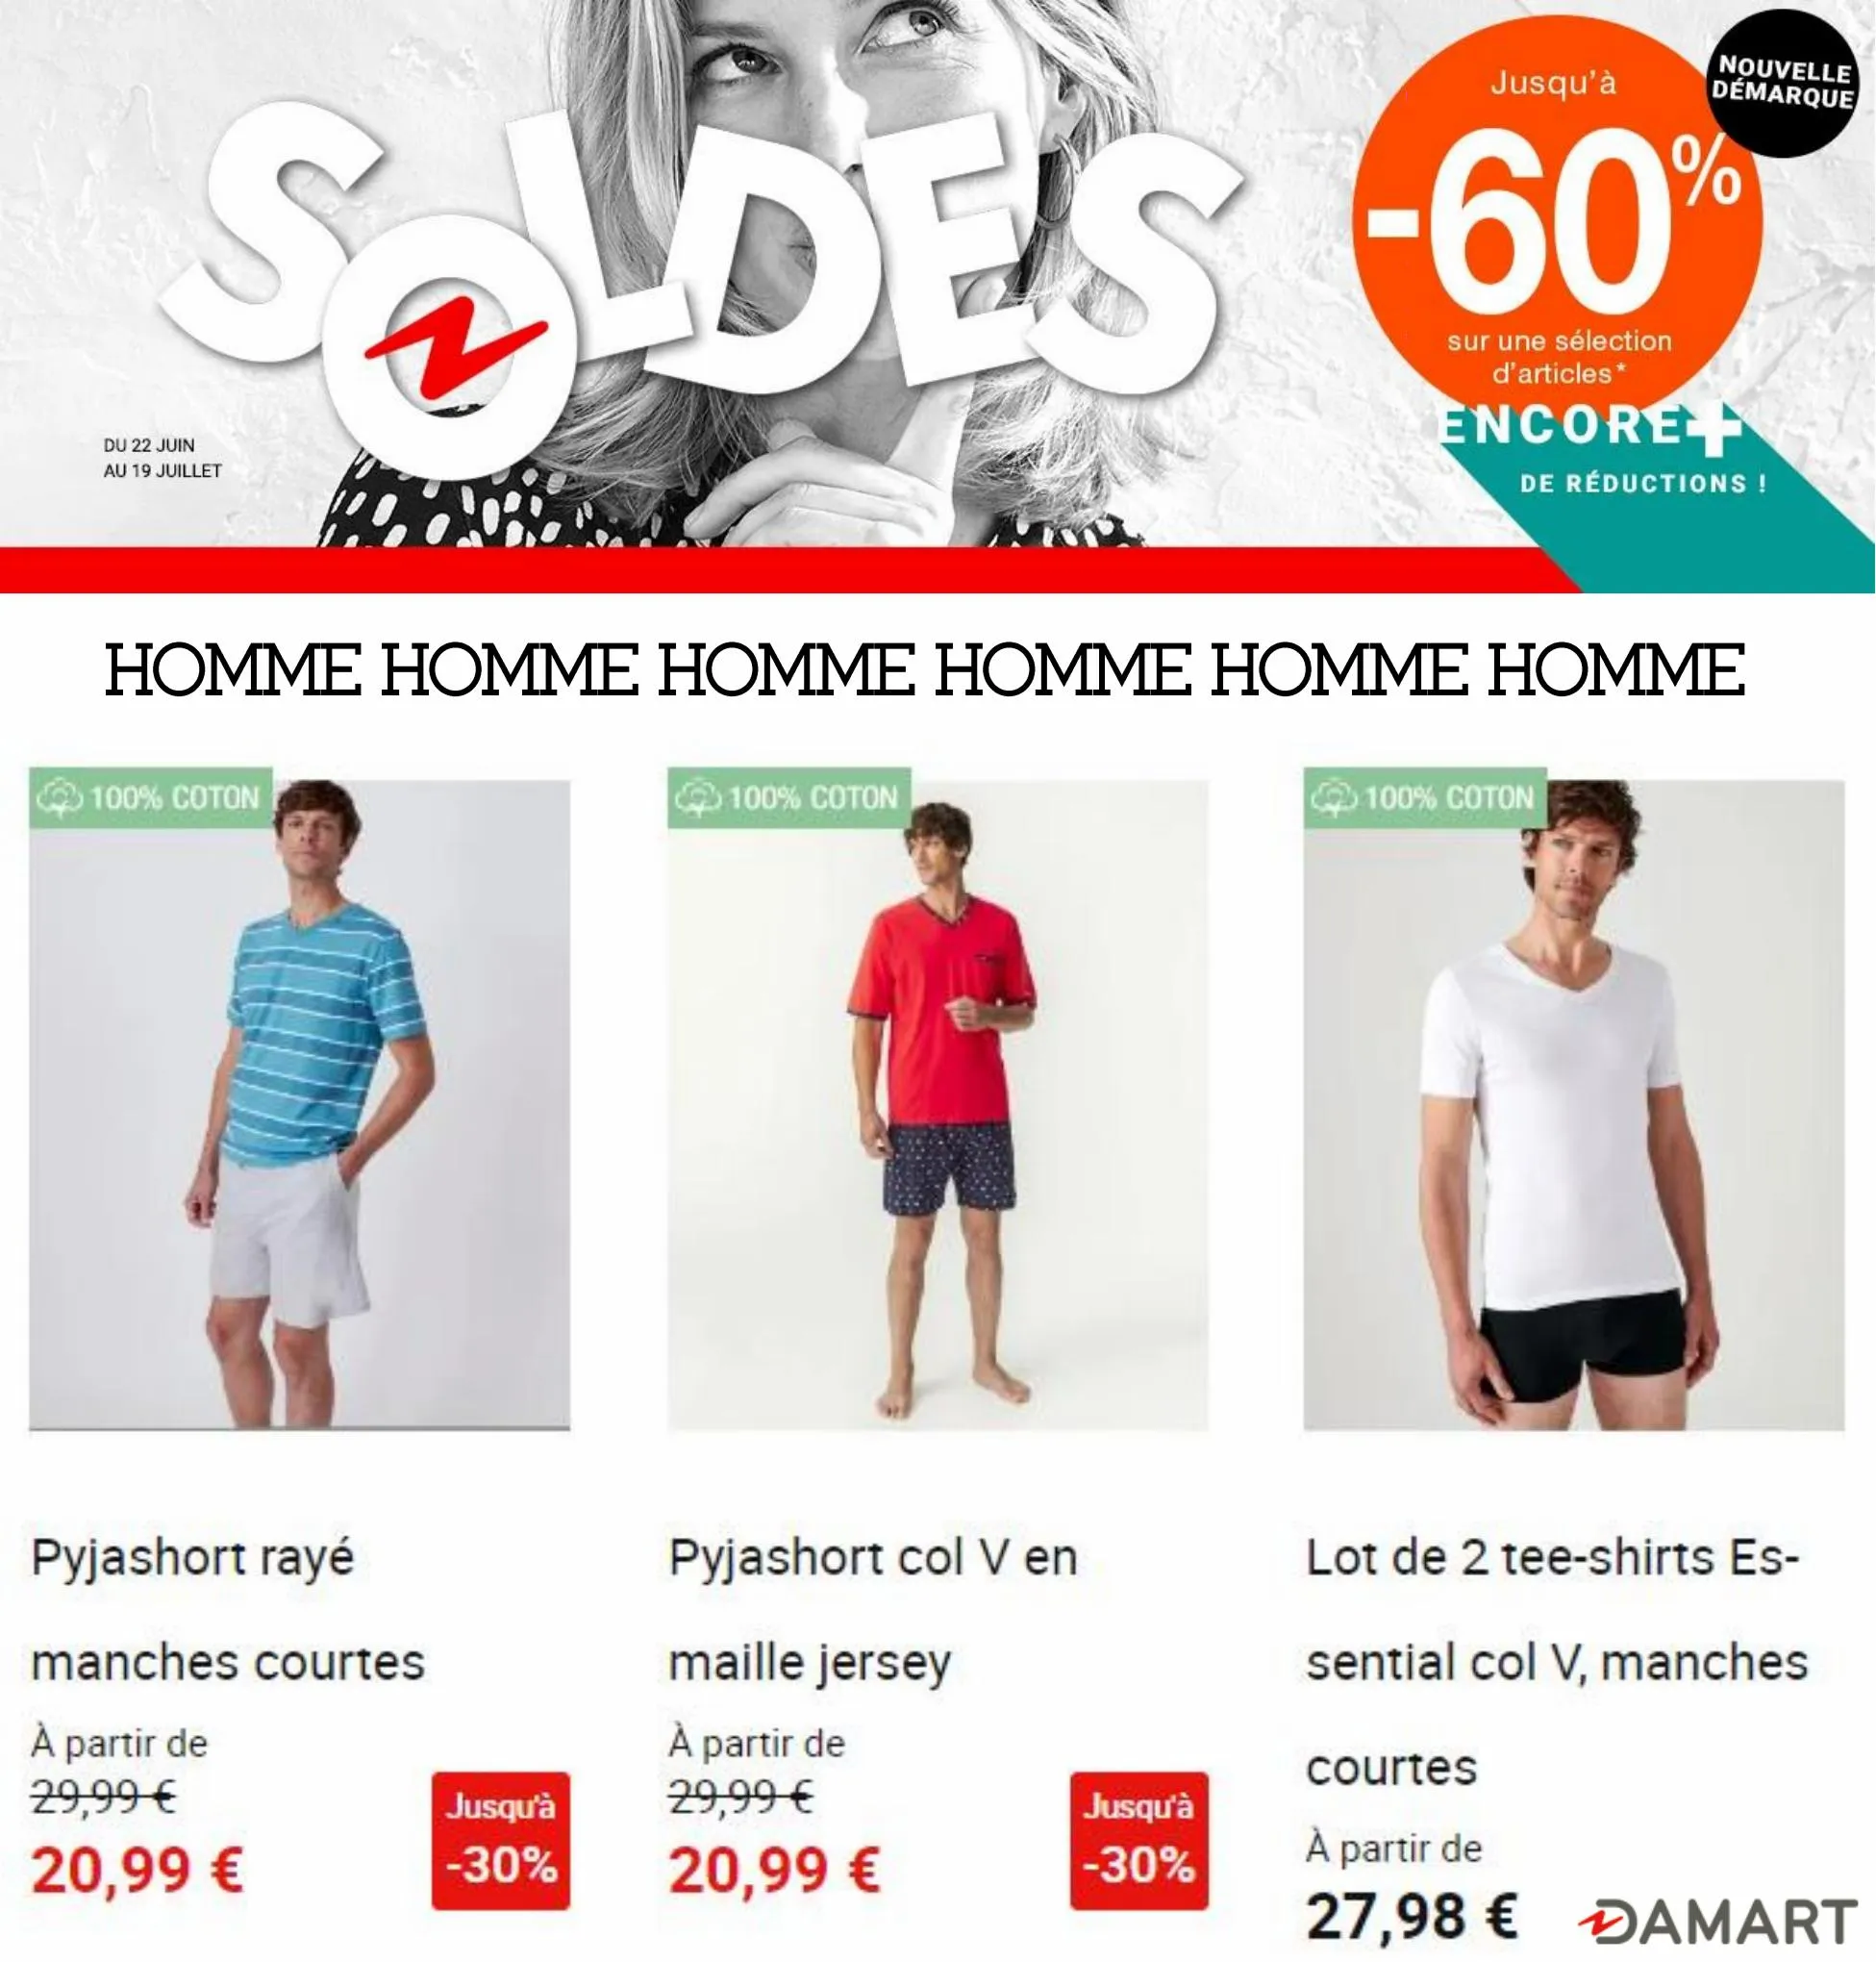 Catalogue SOLDES -60% HOMME, page 00001